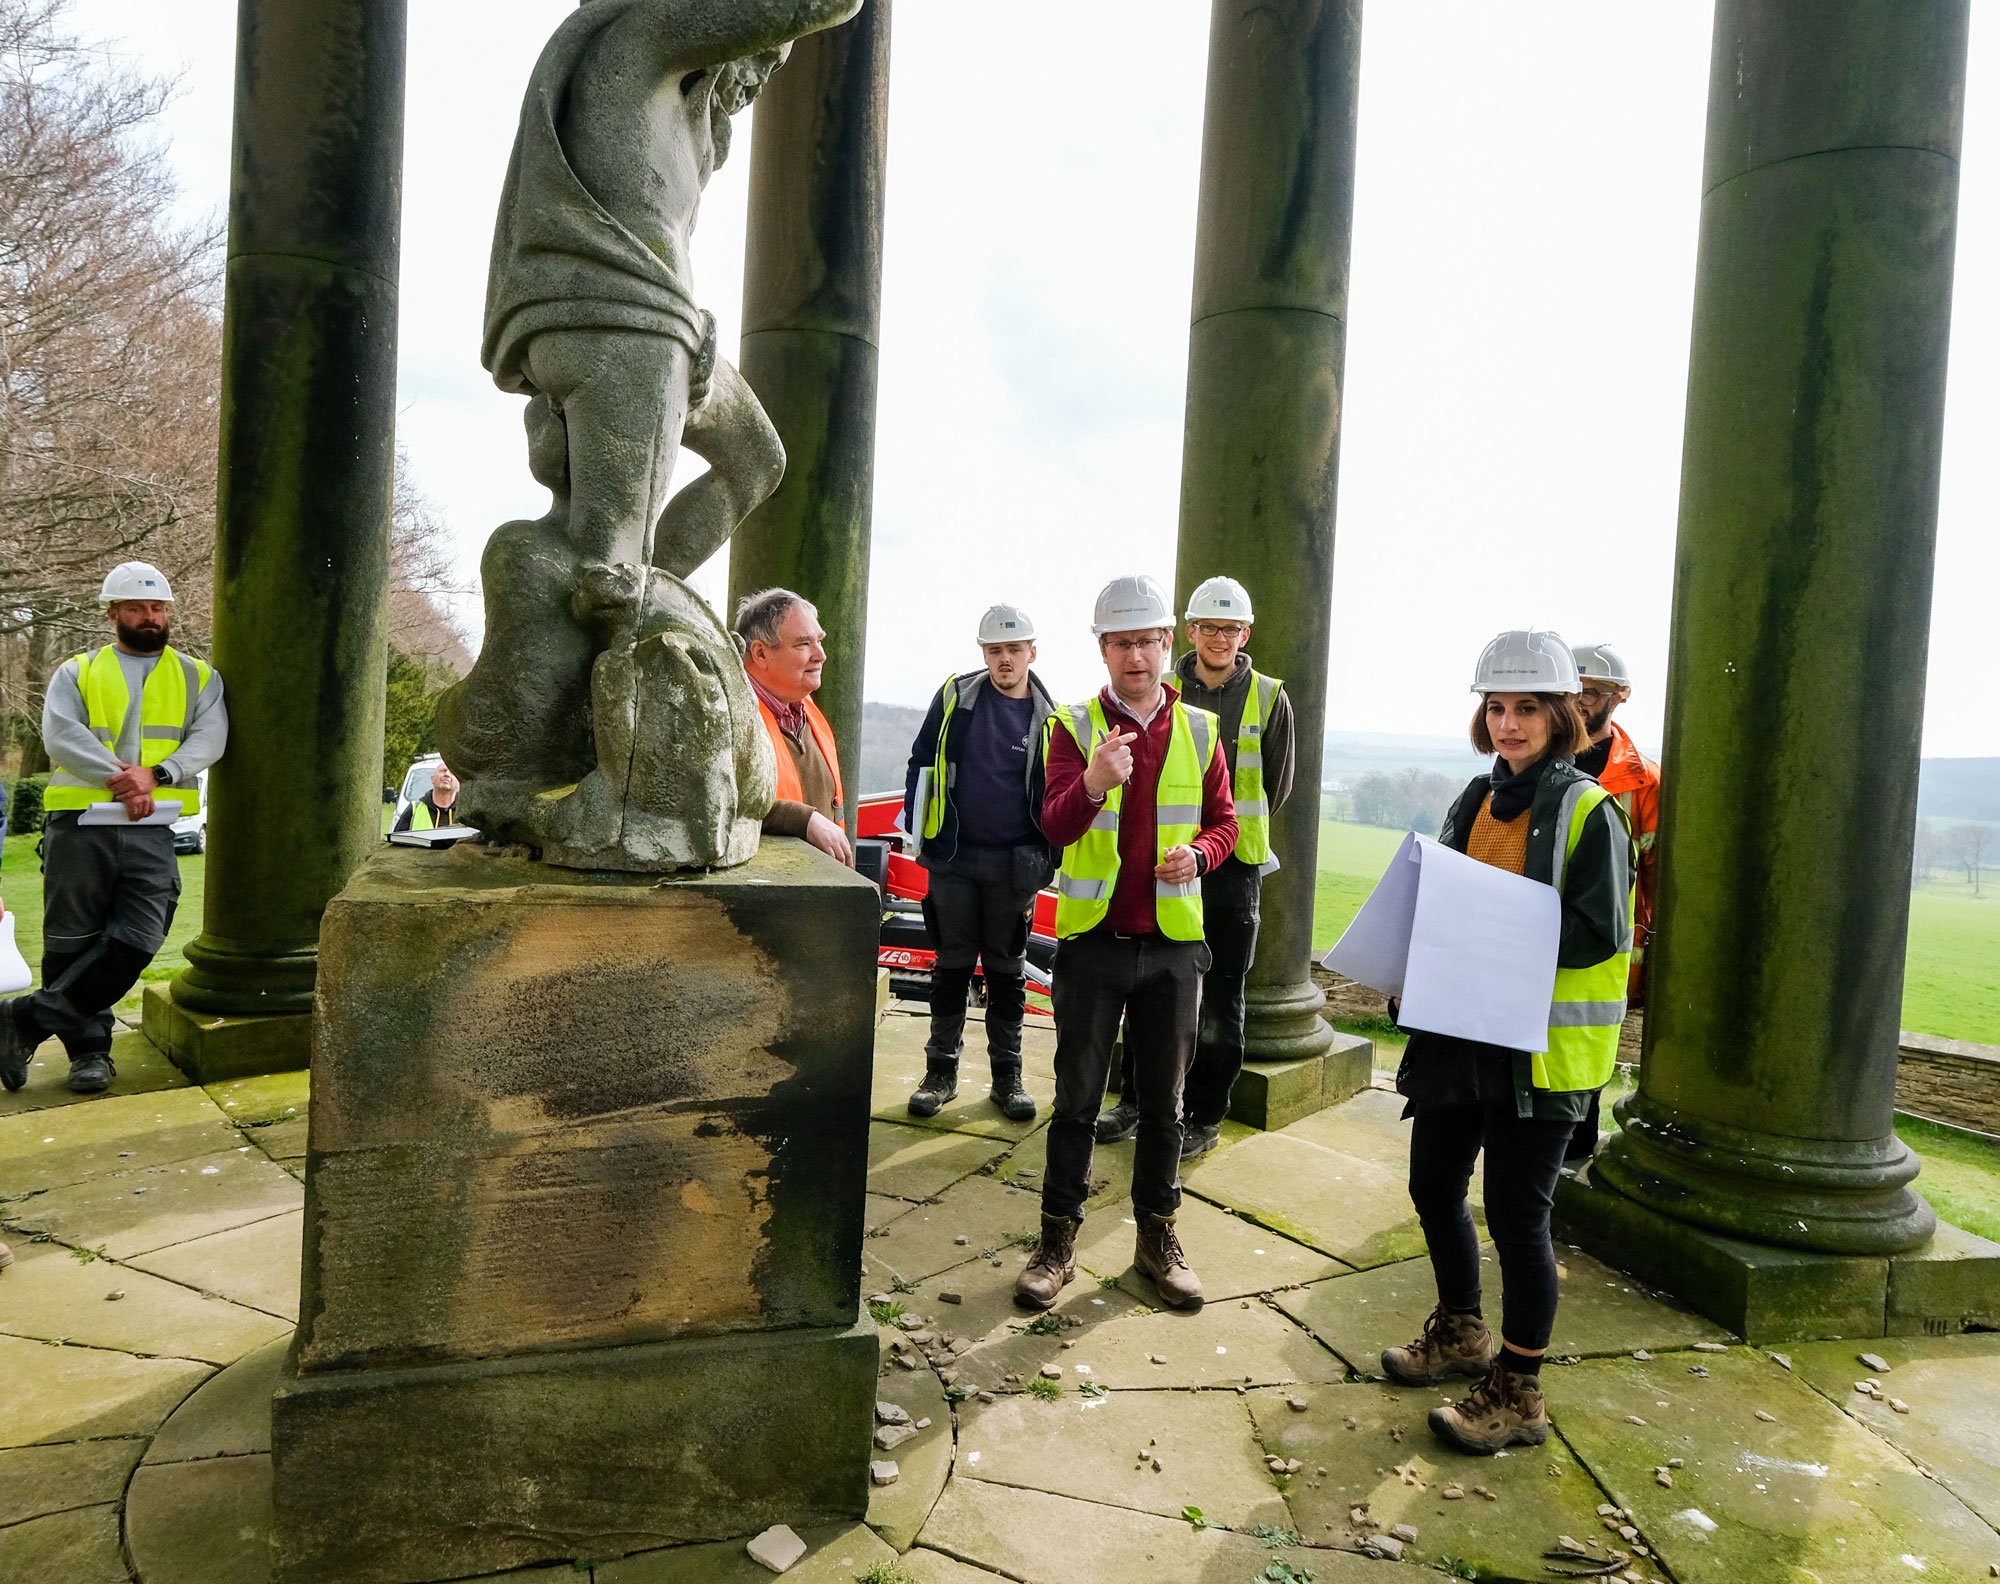 Group of people in hard hats and high-vis jackets visiting a historic site.